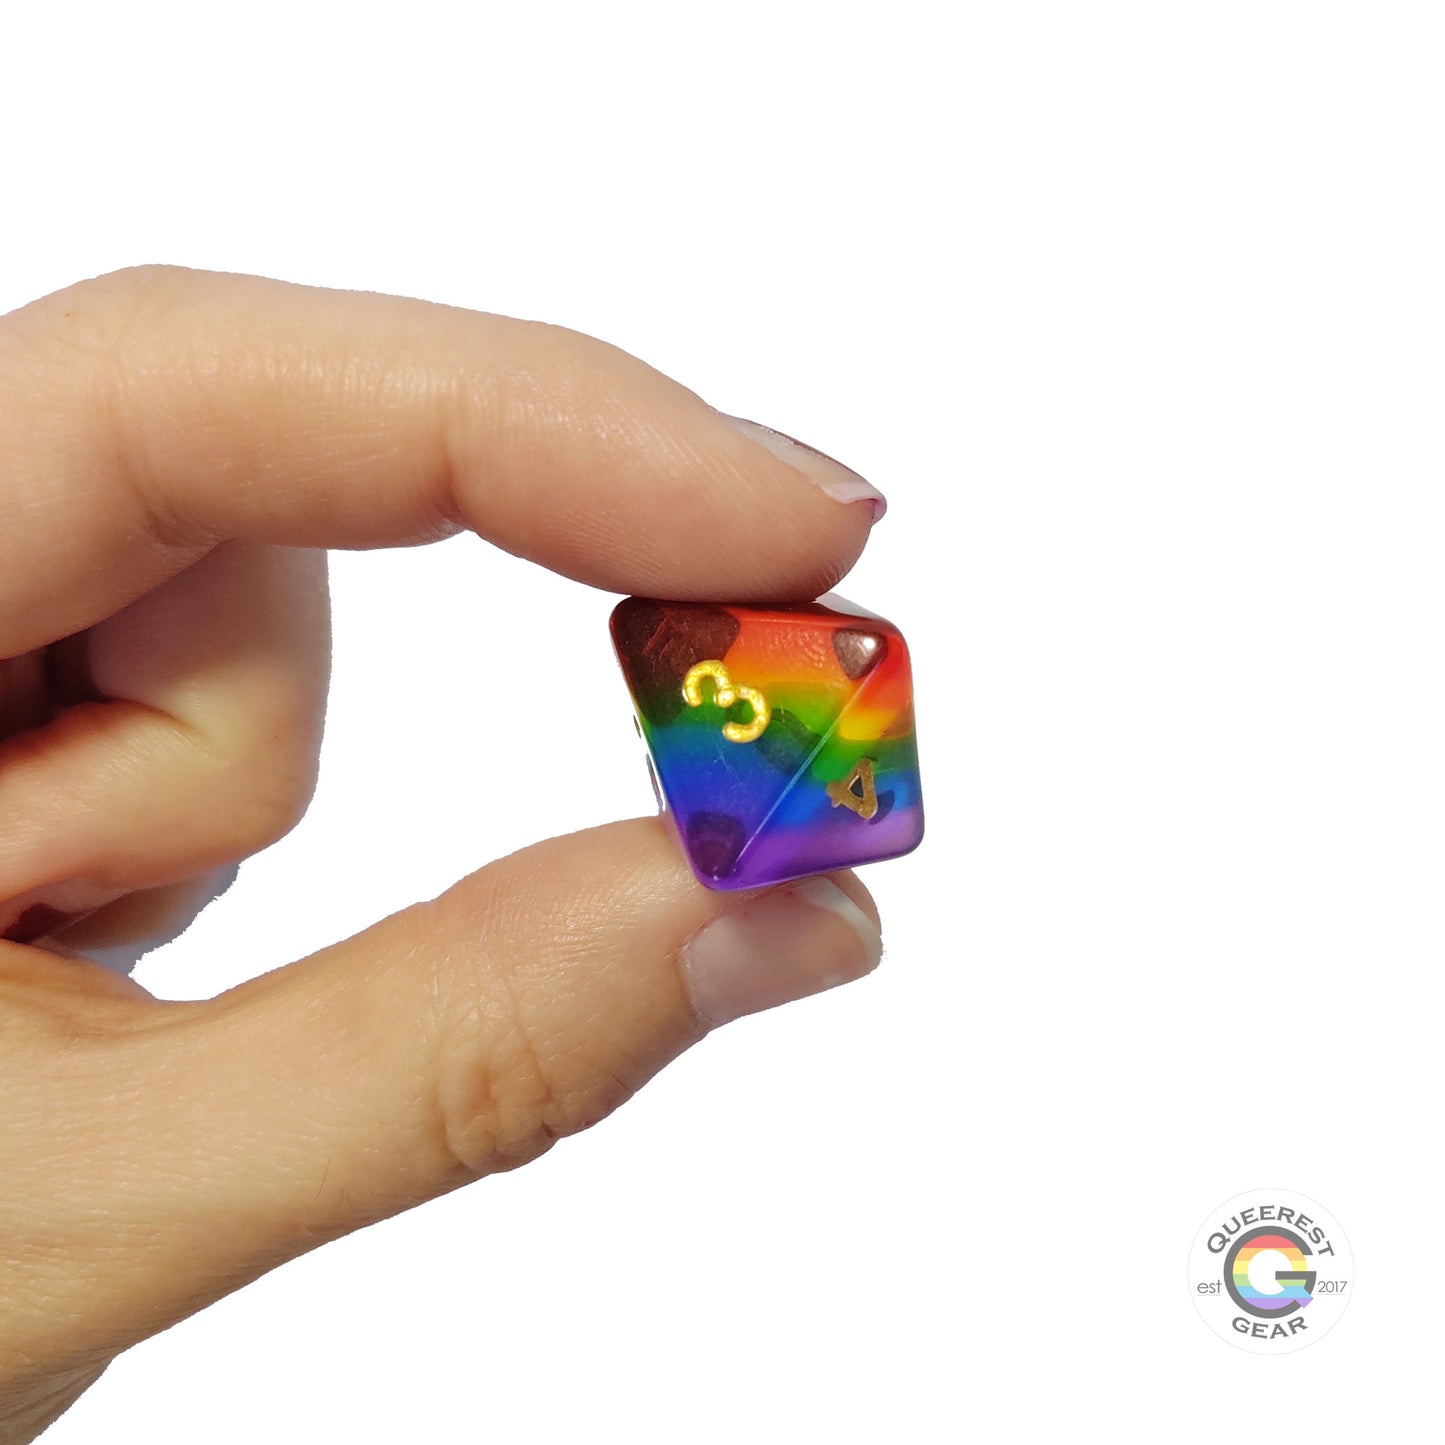  A hand holding up the rainbow d8 to show off the color and transparency